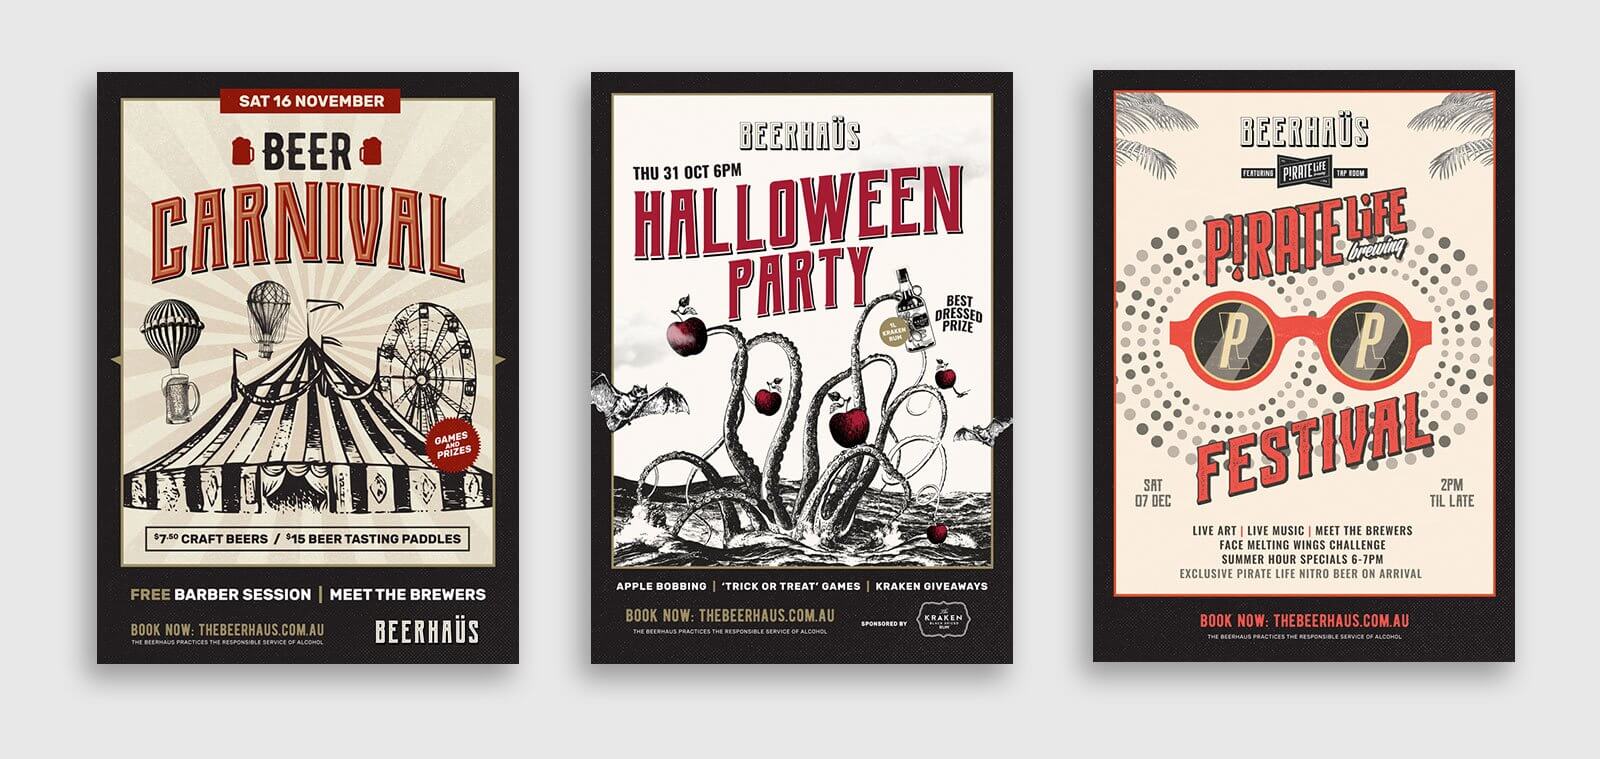 Event poster designs for Beerhaus